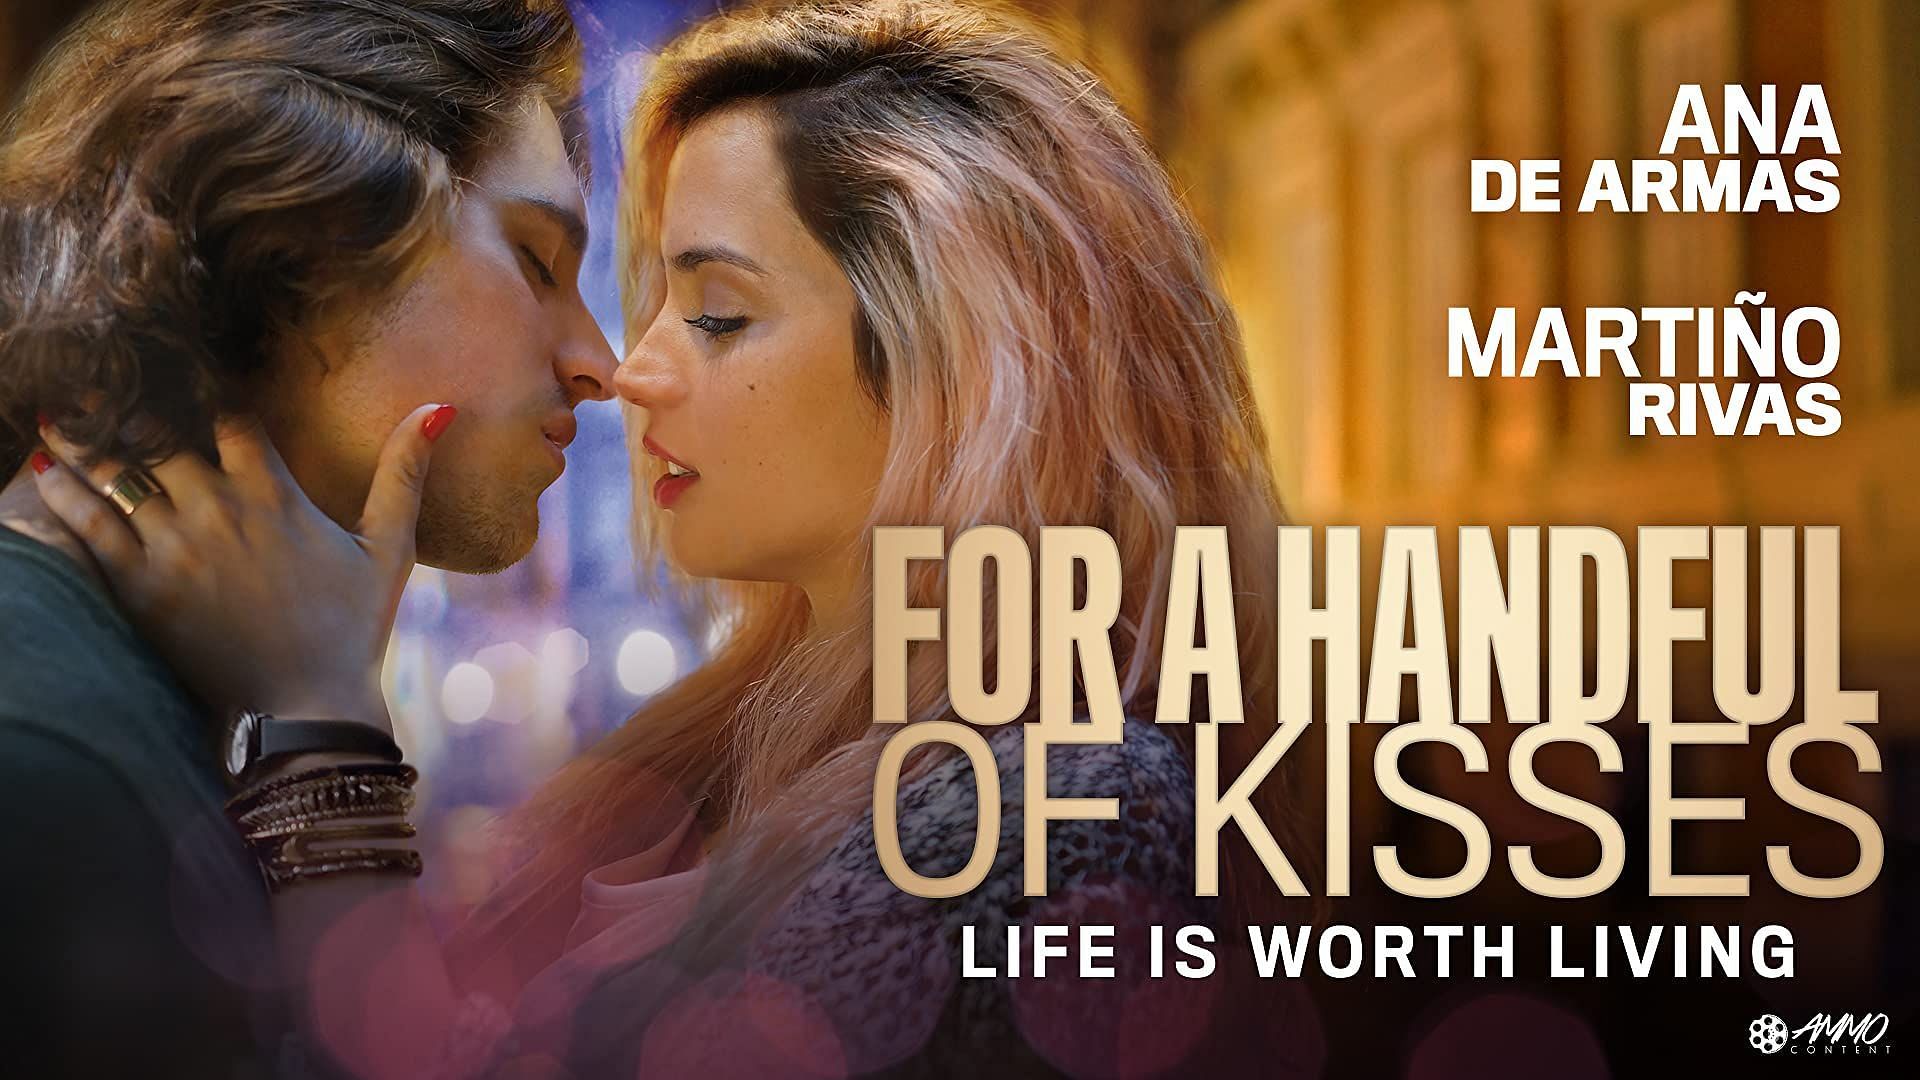 For a Handful of Kisses, also known as Por Un Punado De Besos, is a Spanish romantic drama film directed by David Menkes. (Image via Entertainment One)